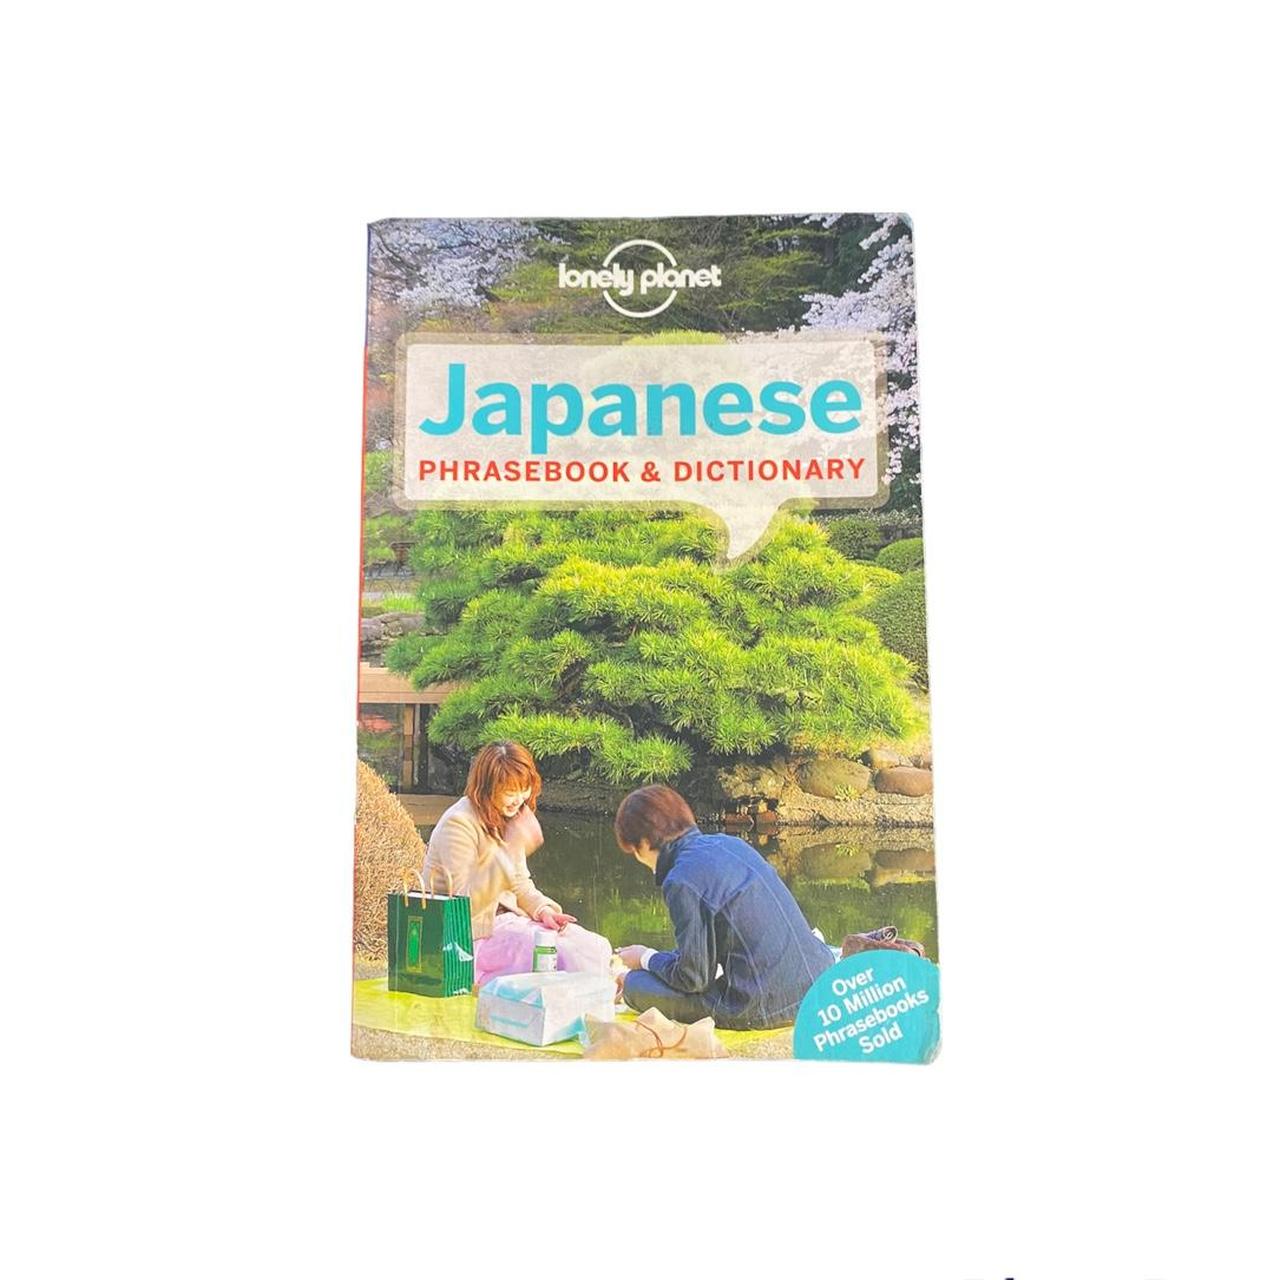 planet　and...　Depop　7th　japanese　edition　phrasebook　????　lonely